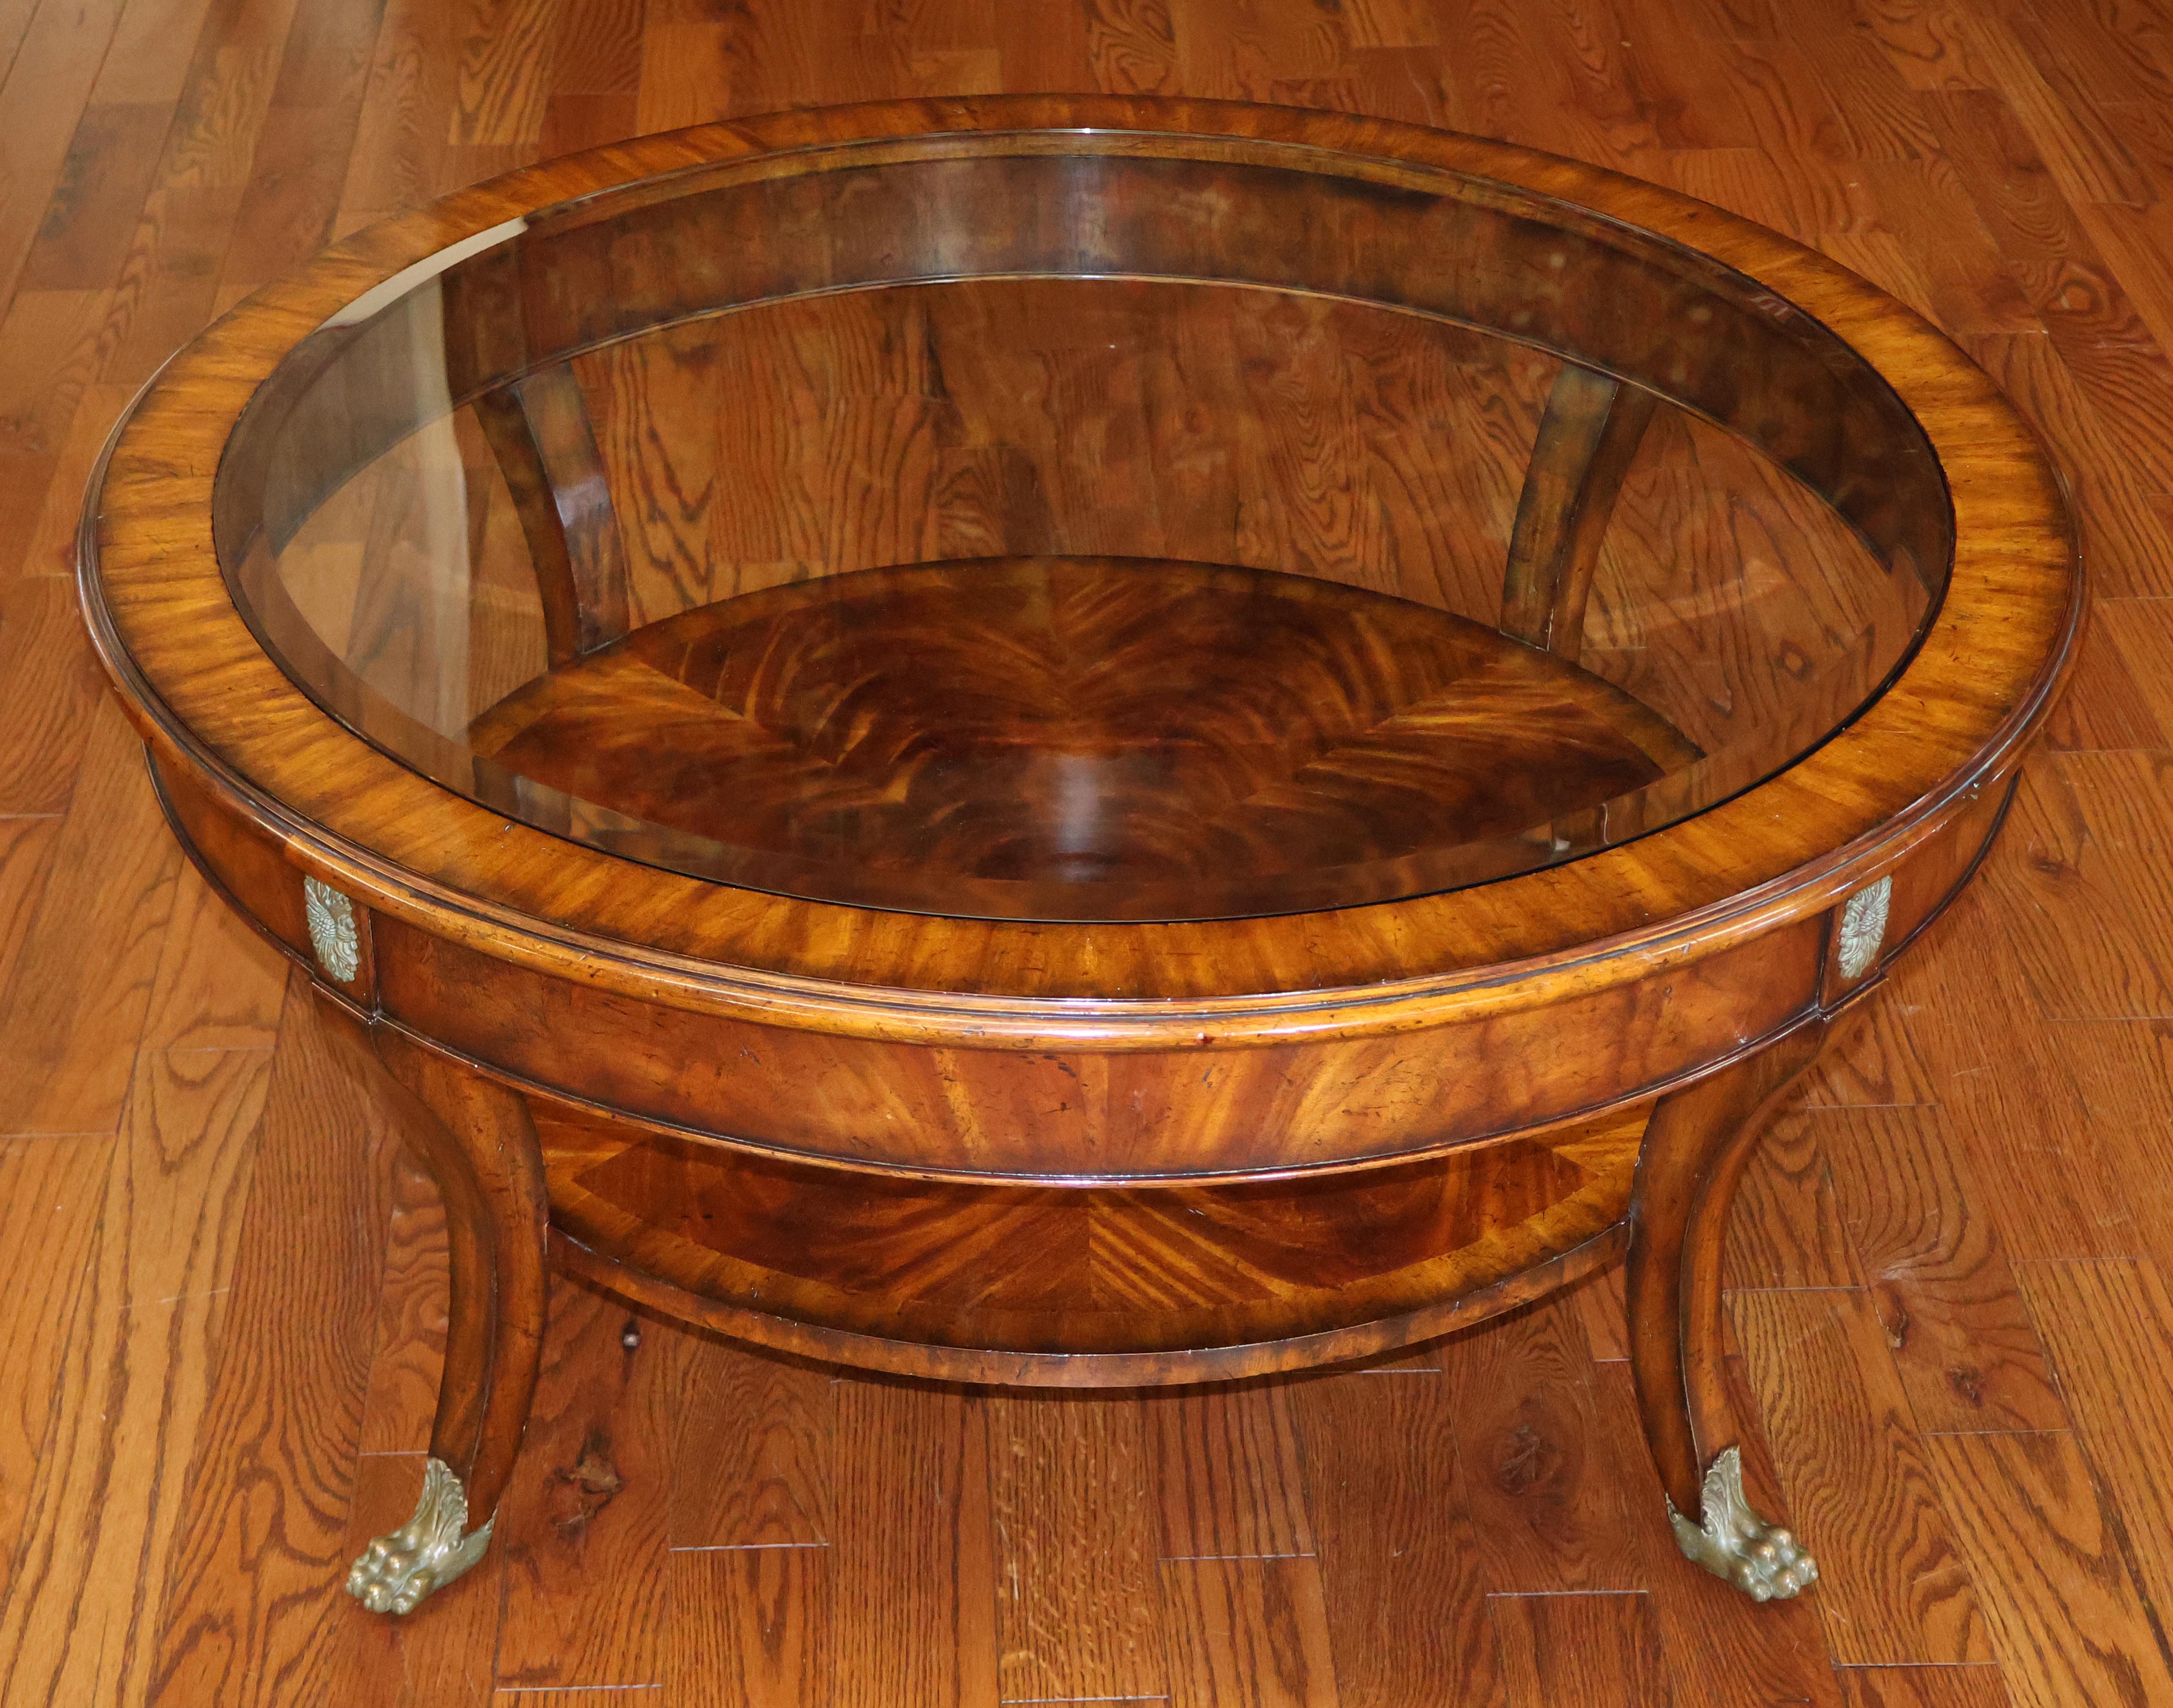 Maitland Smith Regency Style Mahogany Round Glass Top Cocktail Coffee Table
Measures
18 1/4 In H x 40 1/4 Diam

Nice round coffee table made by Maitland Smith. some scratches to glass photographed. Wood in excellent shape.